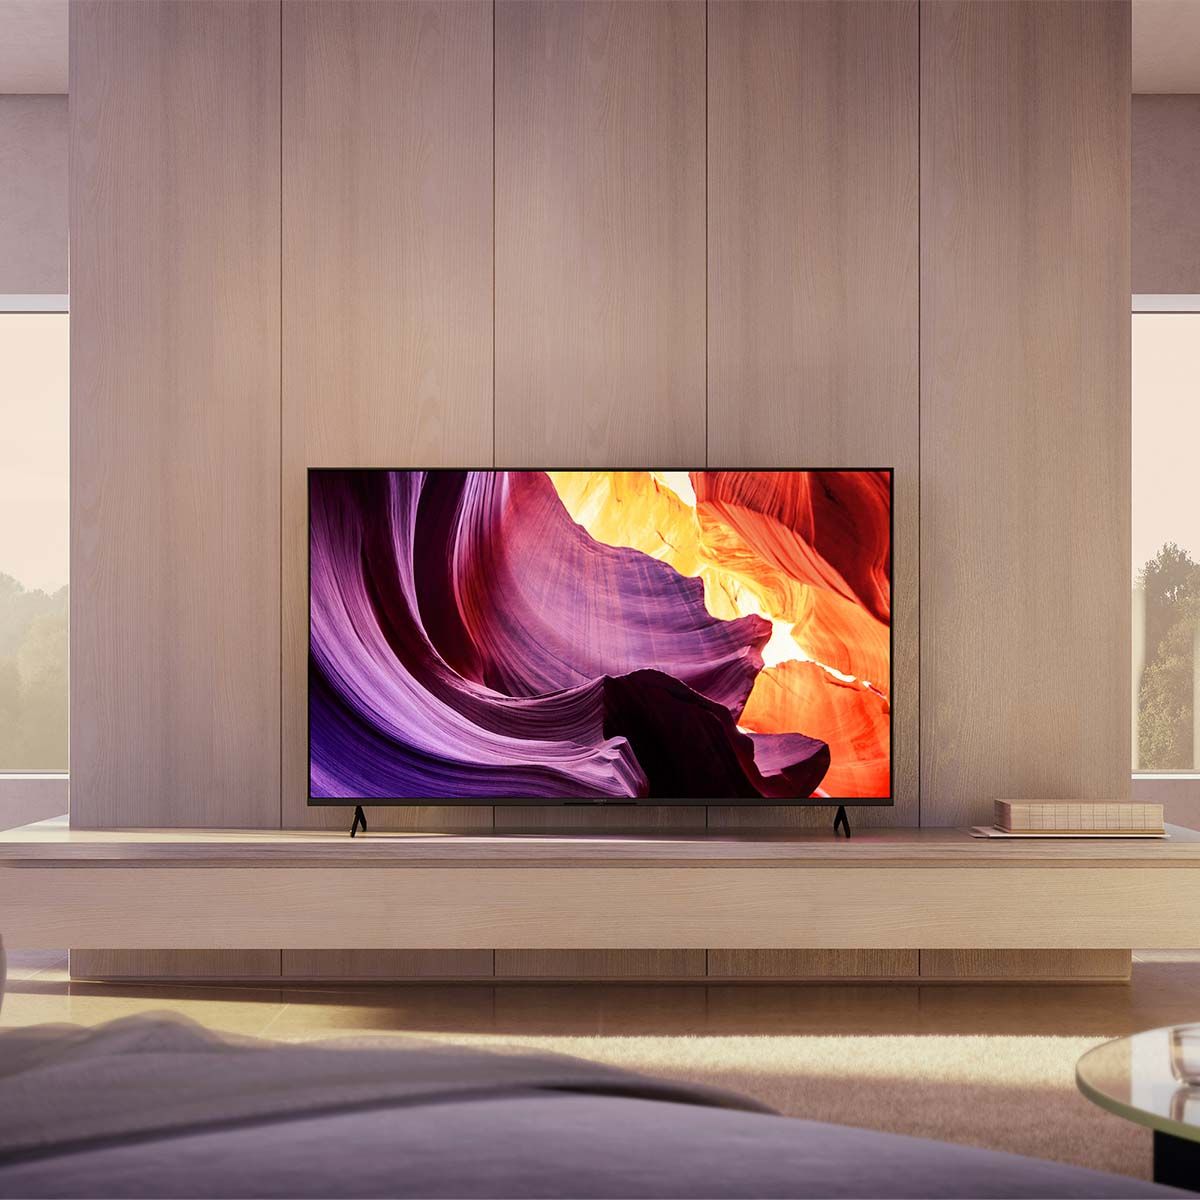 Sony X80K 4K LED Television, in a light-colored media room against a wood wall